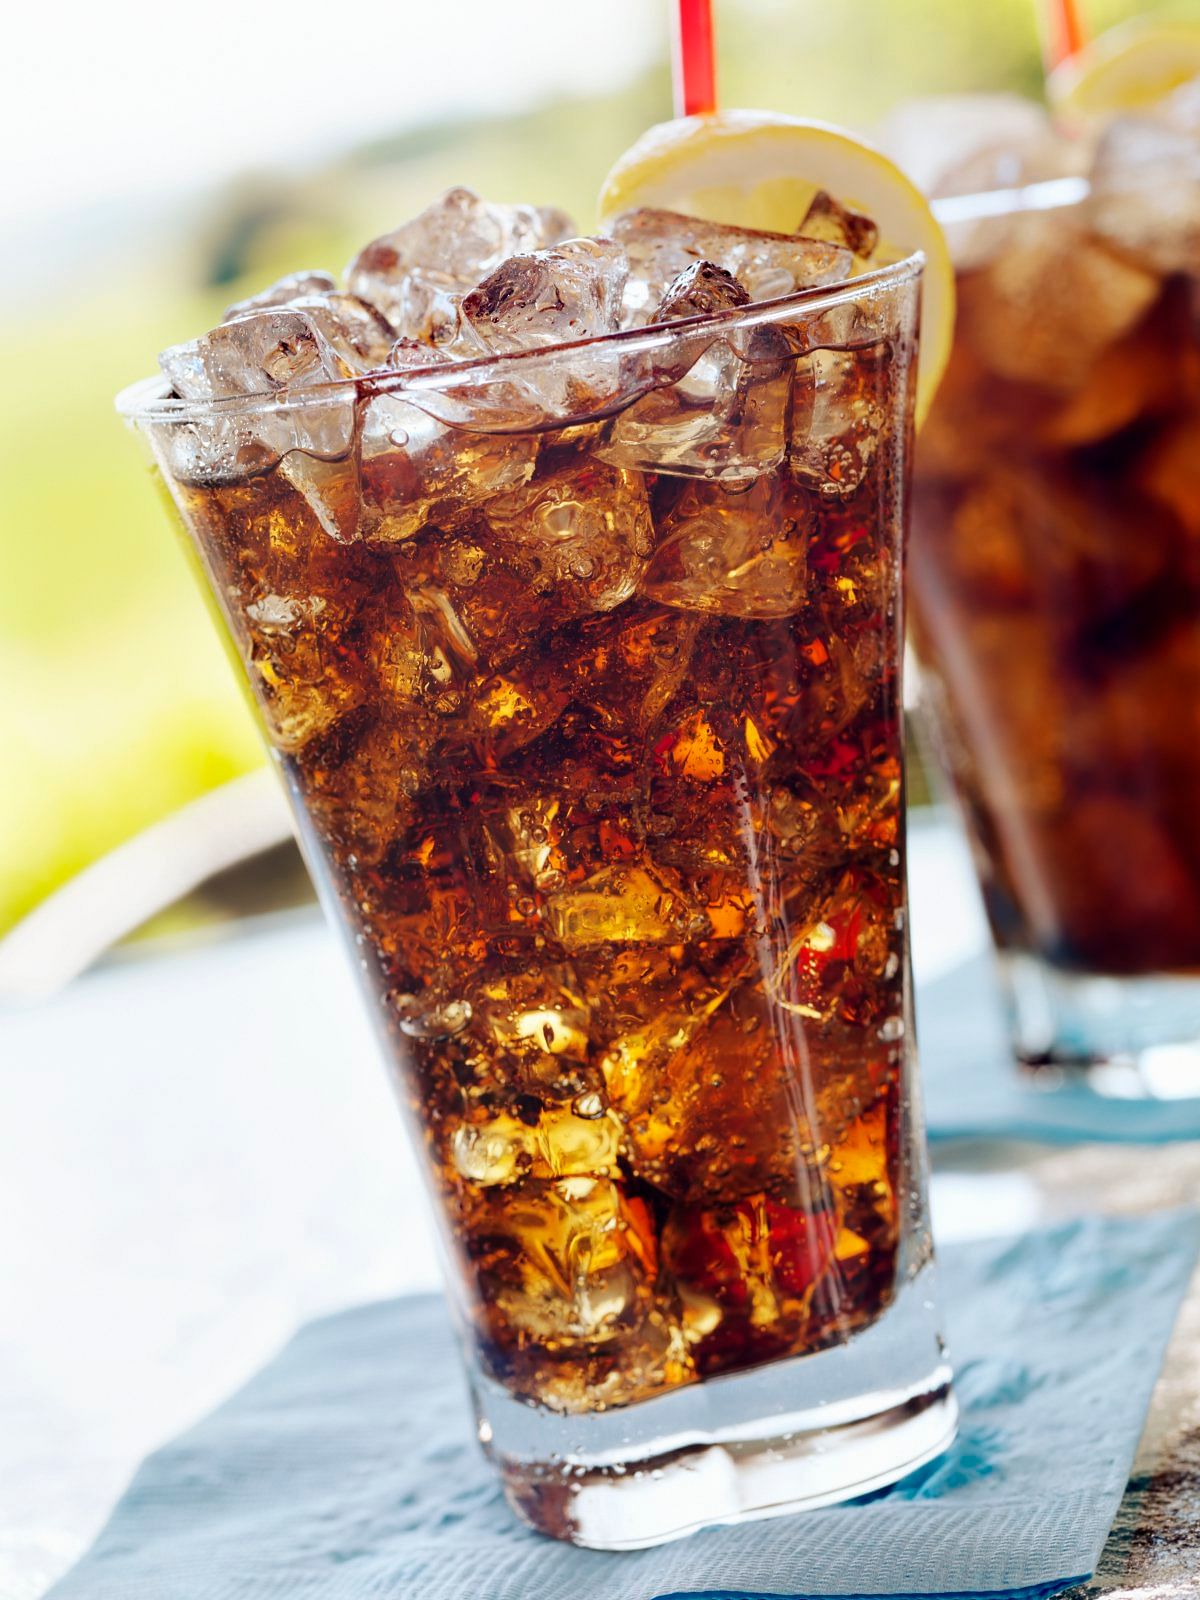 As if you needed another reason to kick this bad habit, drinking soda can harm your ticker.